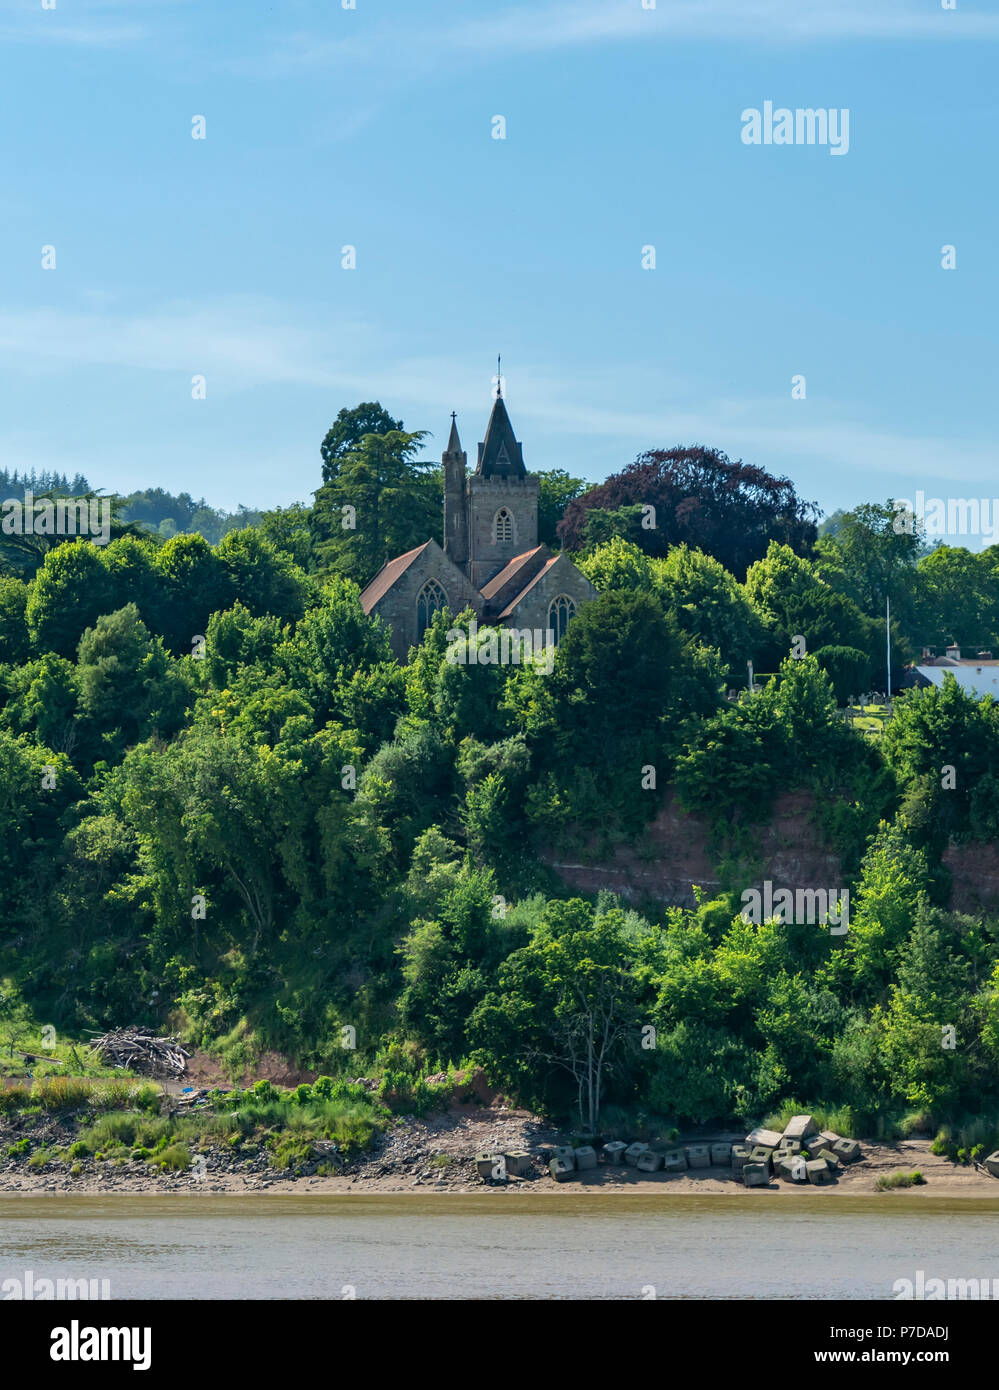 The Church of St Peters in Newnham on Severn as seen from the New Passage side of the River Severn, UK Stock Photo